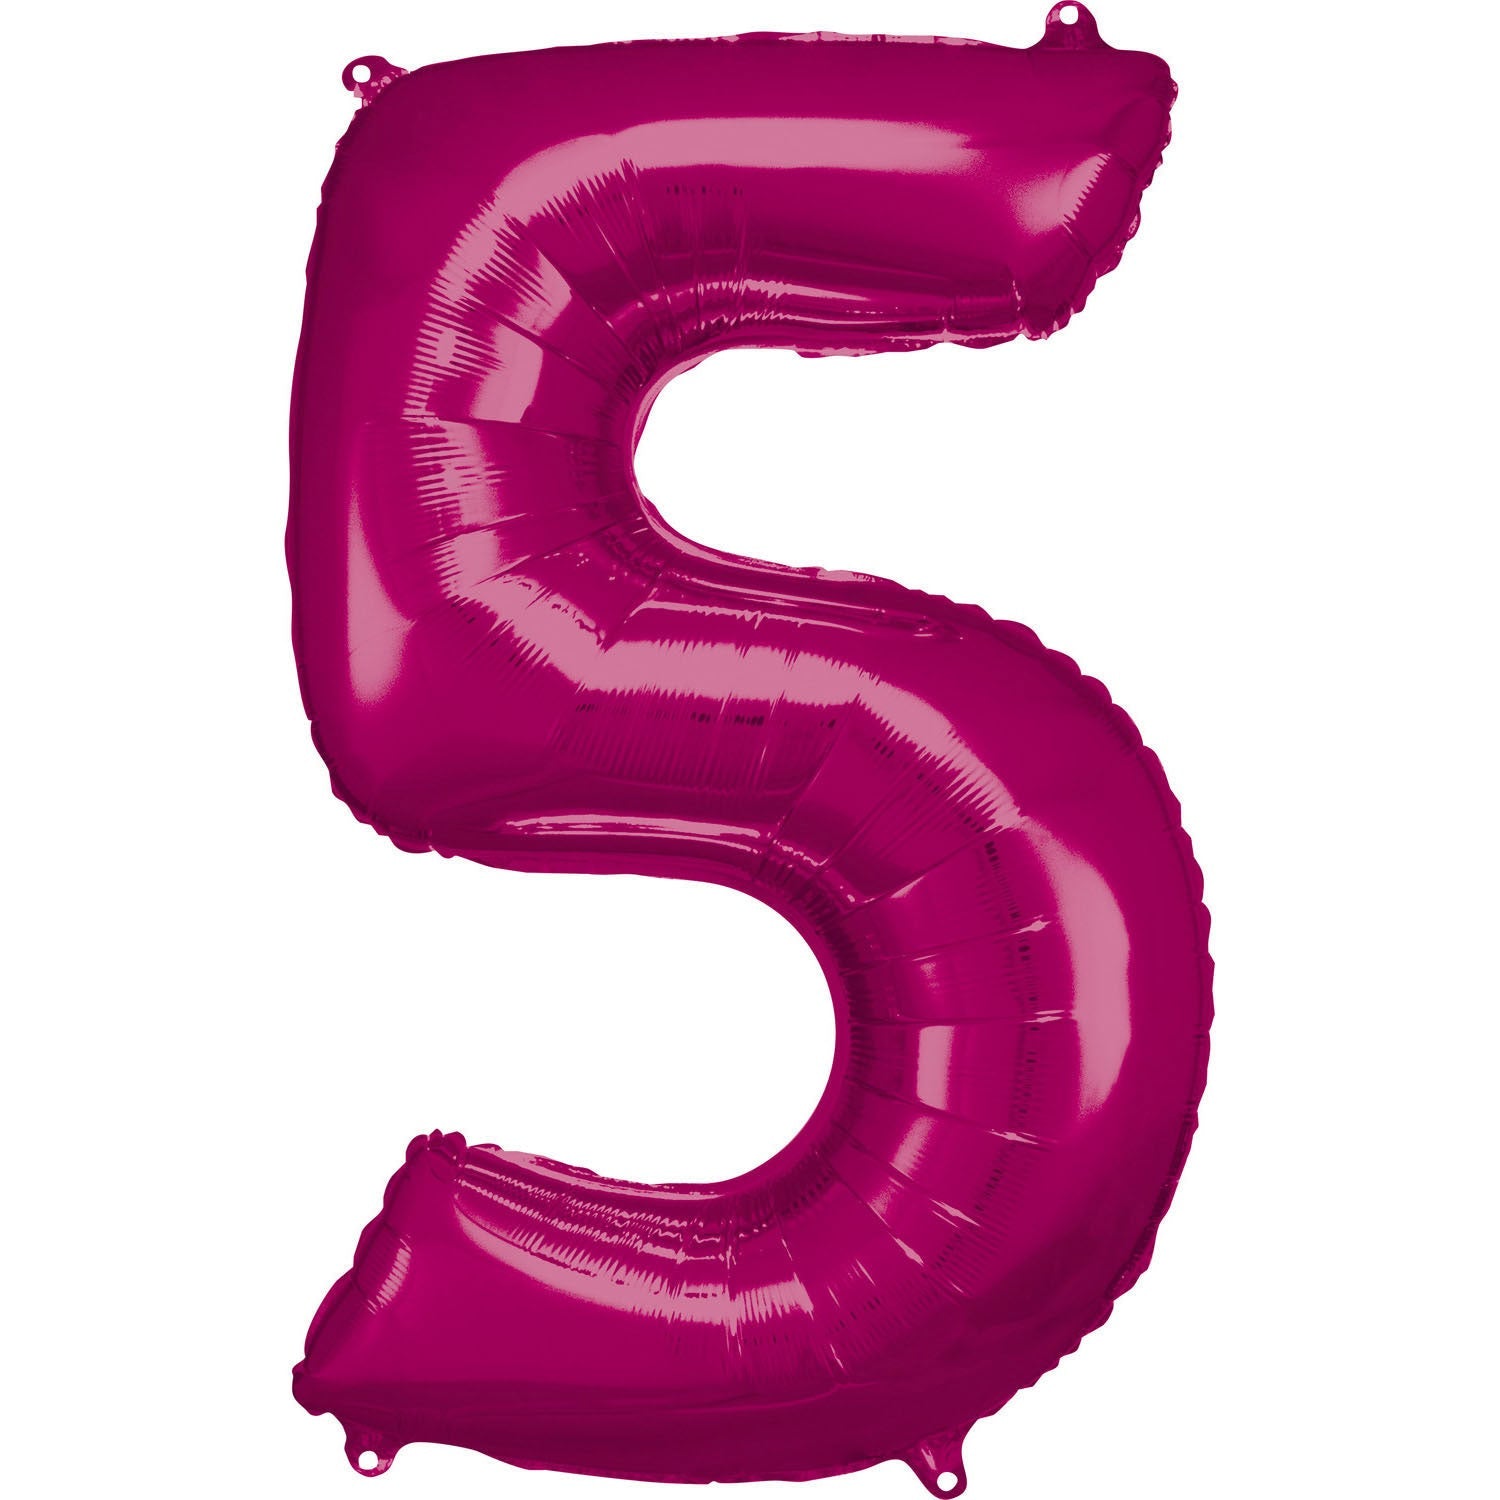 Pink Supershape Number 5 Foil Balloon 86cm (33in) height by 58cm (22in) width Balloon is sold uninflated. Can be inflated with air or helium.